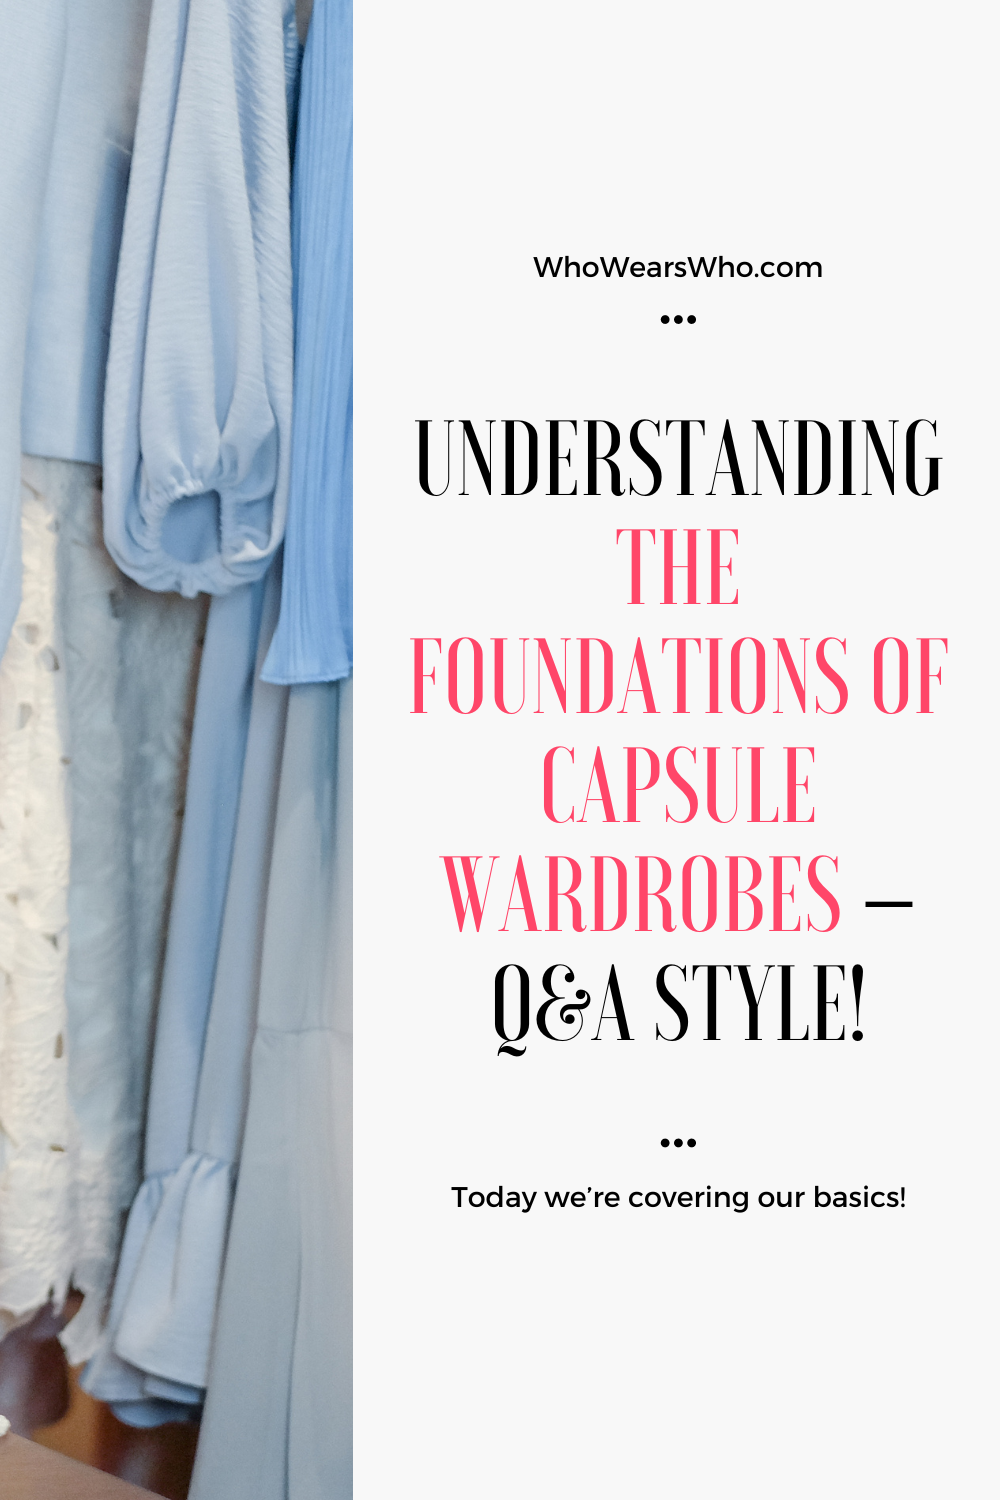 The foundations of capsule wardrobes